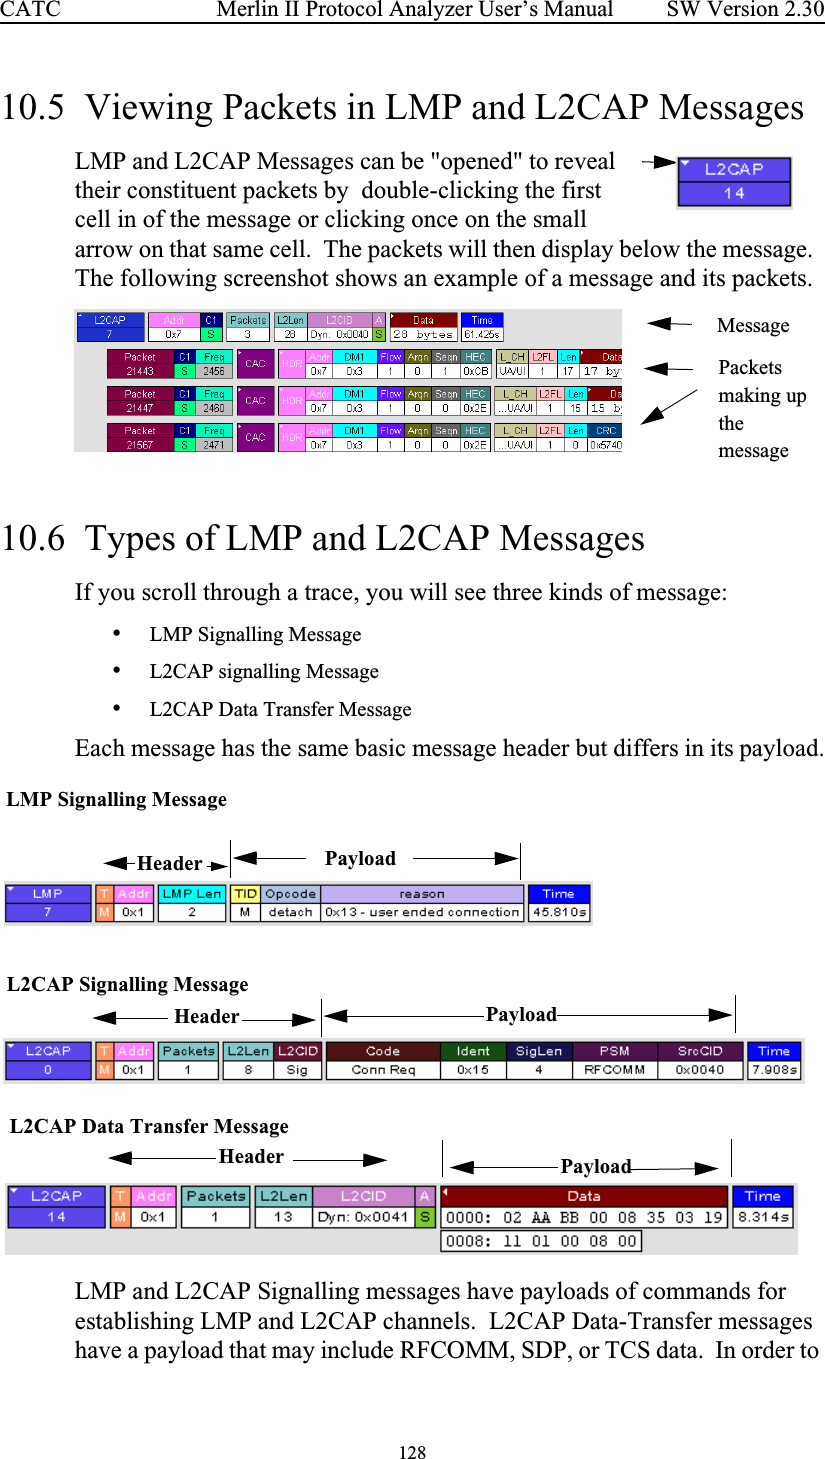 128 Merlin II Protocol Analyzer User’s ManualCATC SW Version 2.3010.5  Viewing Packets in LMP and L2CAP MessagesLMP and L2CAP Messages can be &quot;opened&quot; to reveal their constituent packets by  double-clicking the first cell in of the message or clicking once on the small arrow on that same cell.  The packets will then display below the message.  The following screenshot shows an example of a message and its packets.10.6  Types of LMP and L2CAP MessagesIf you scroll through a trace, you will see three kinds of message:  •LMP Signalling Message•L2CAP signalling Message•L2CAP Data Transfer MessageEach message has the same basic message header but differs in its payload.LMP and L2CAP Signalling messages have payloads of commands for establishing LMP and L2CAP channels.  L2CAP Data-Transfer messages have a payload that may include RFCOMM, SDP, or TCS data.  In order to MessagePacketsmaking upthemessageLMP Signalling MessageL2CAP Signalling MessageL2CAP Data Transfer MessagePayloadPayloadHeader PayloadHeaderHeader